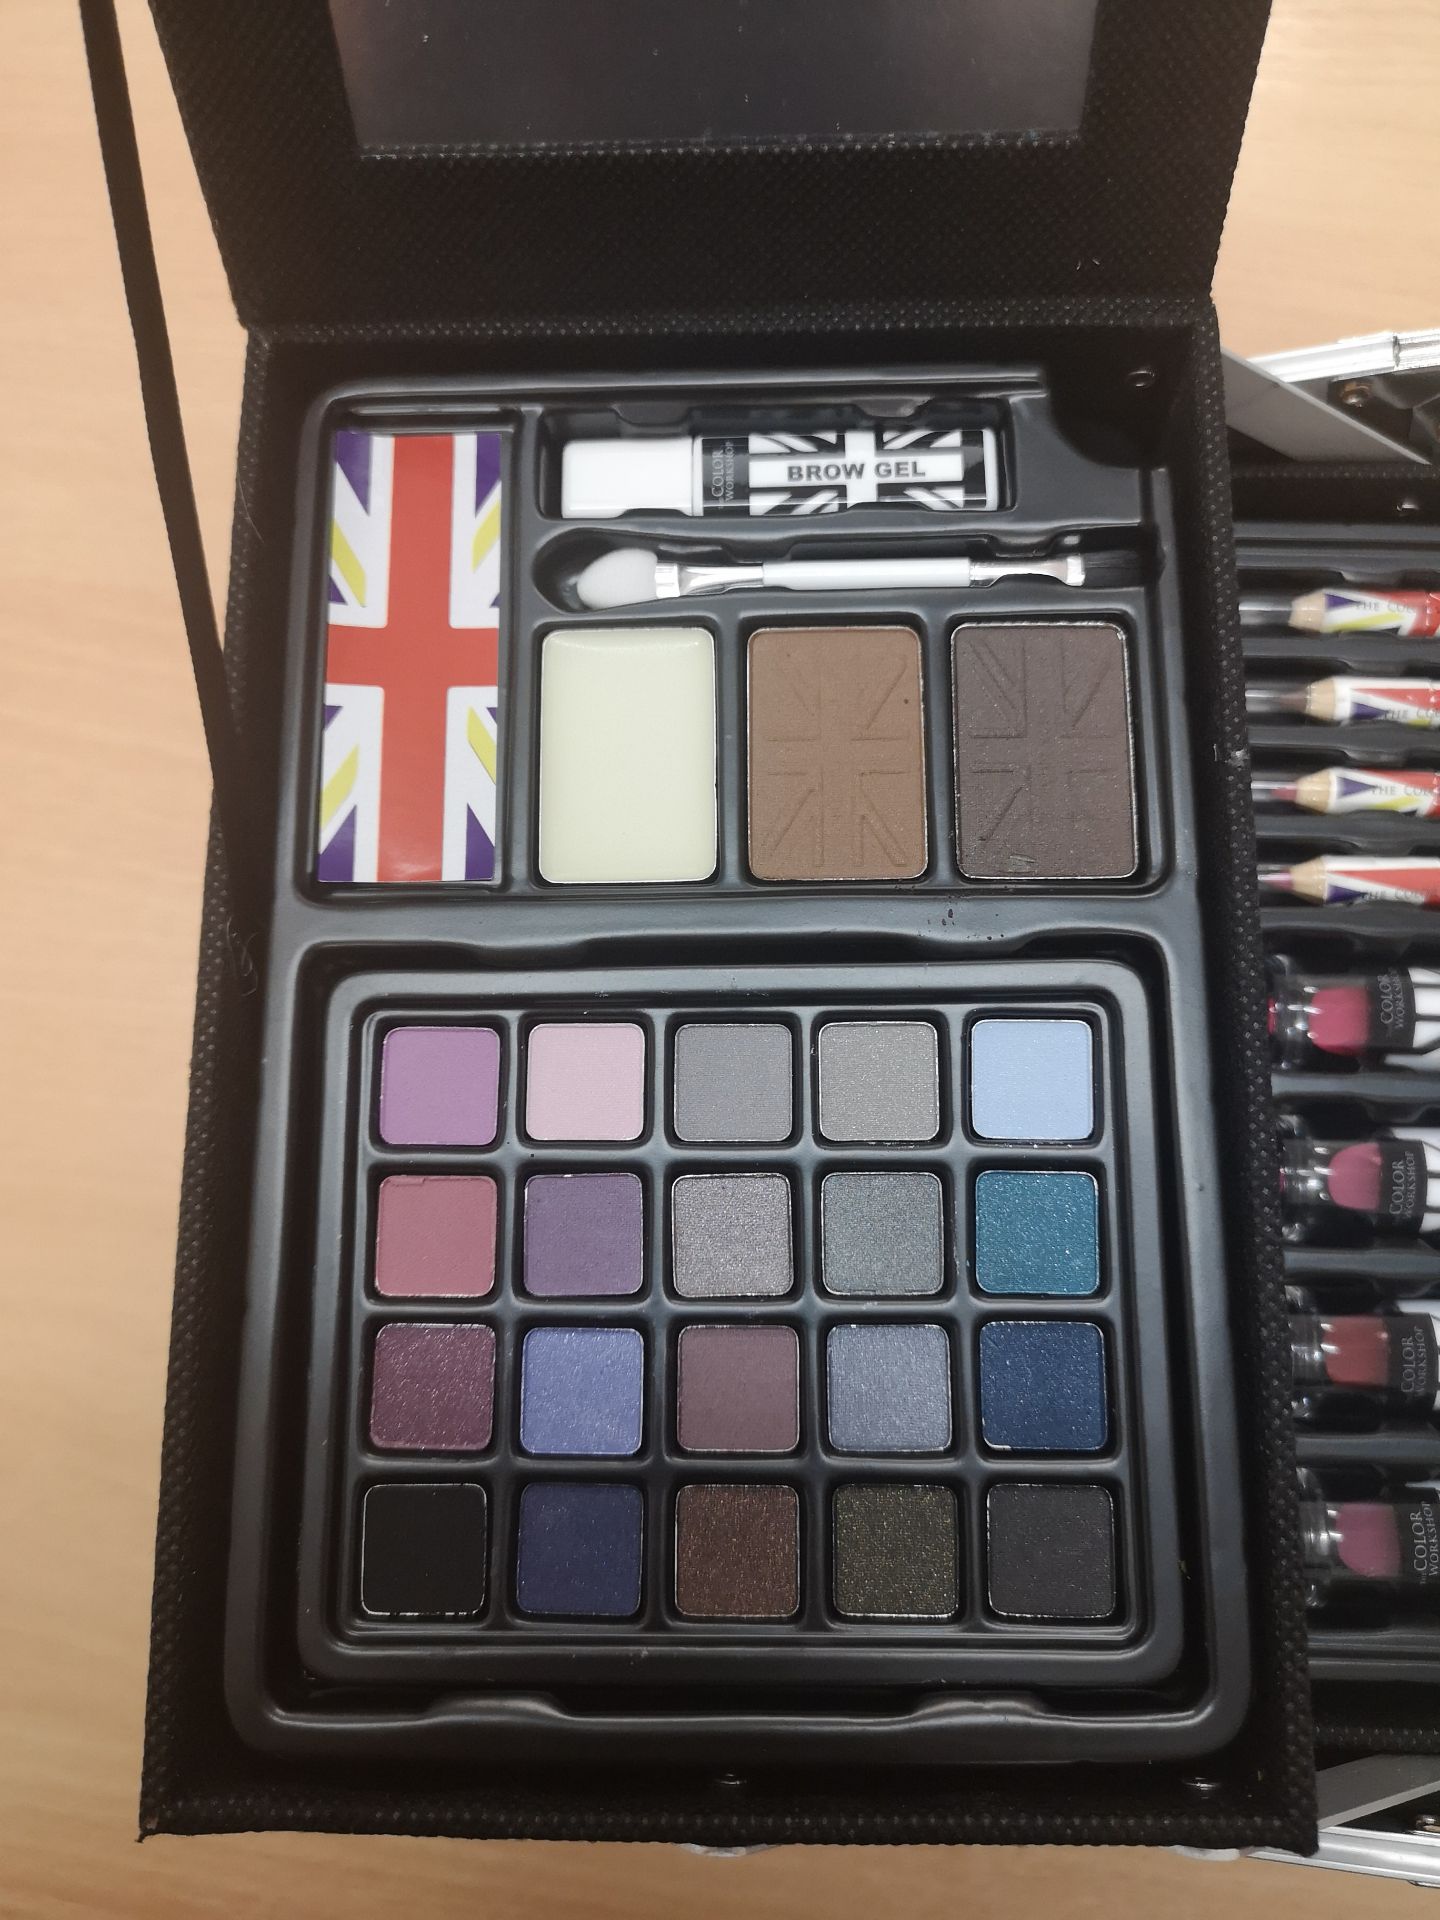 V Brand New 43 Piece Makeup Vanity Case By The Color Institute - Includes 20 Colour Eyeshadow - Image 3 of 5